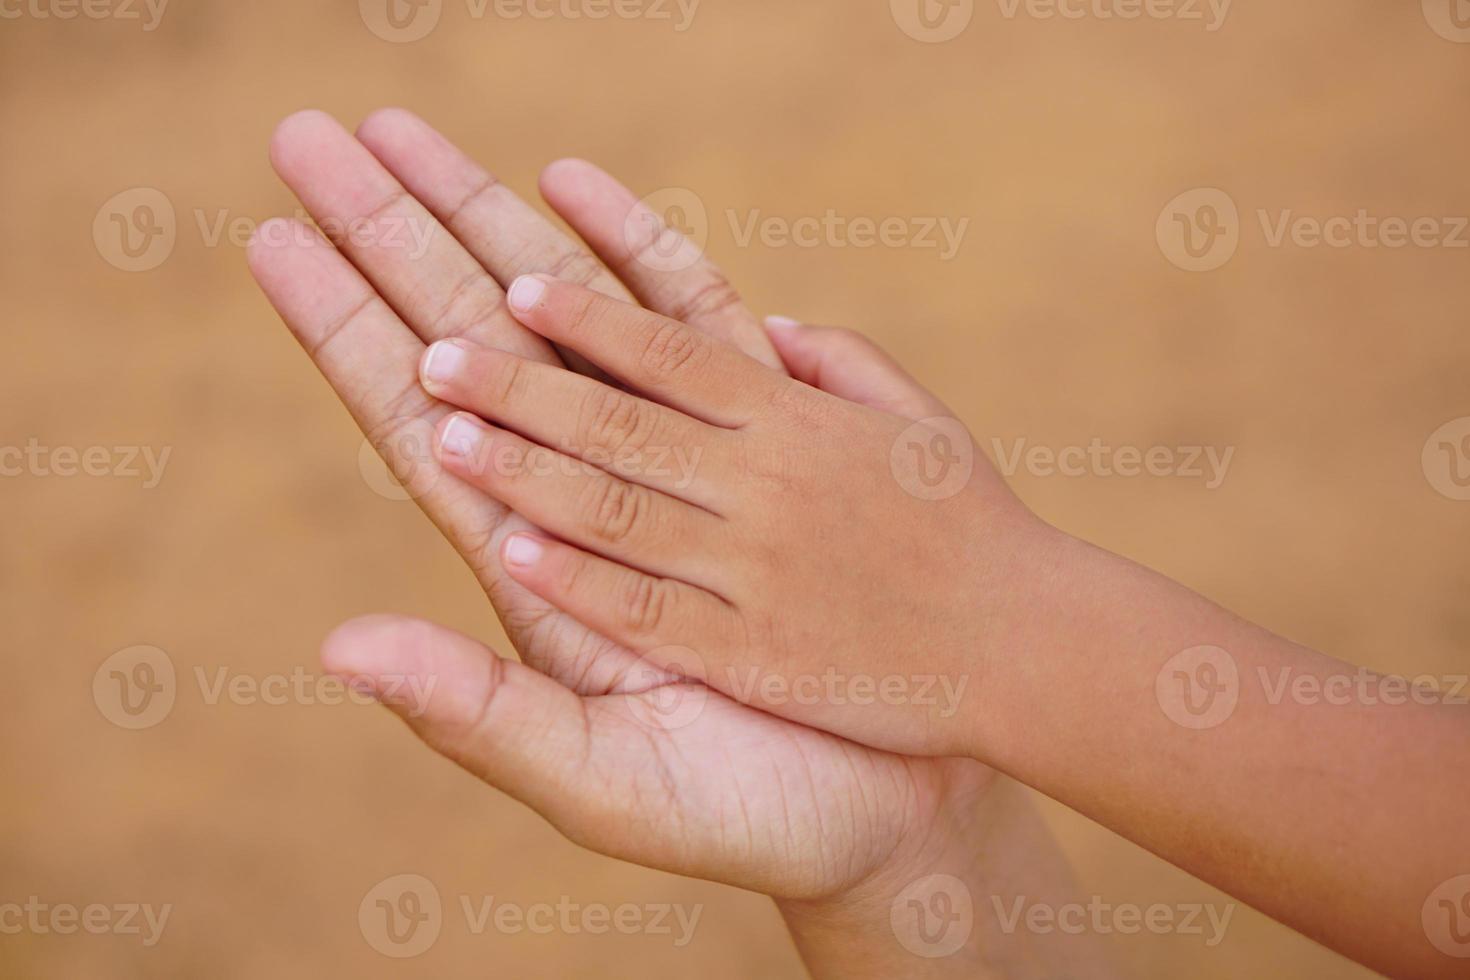 Mother and Child  holding hands to receive something photo